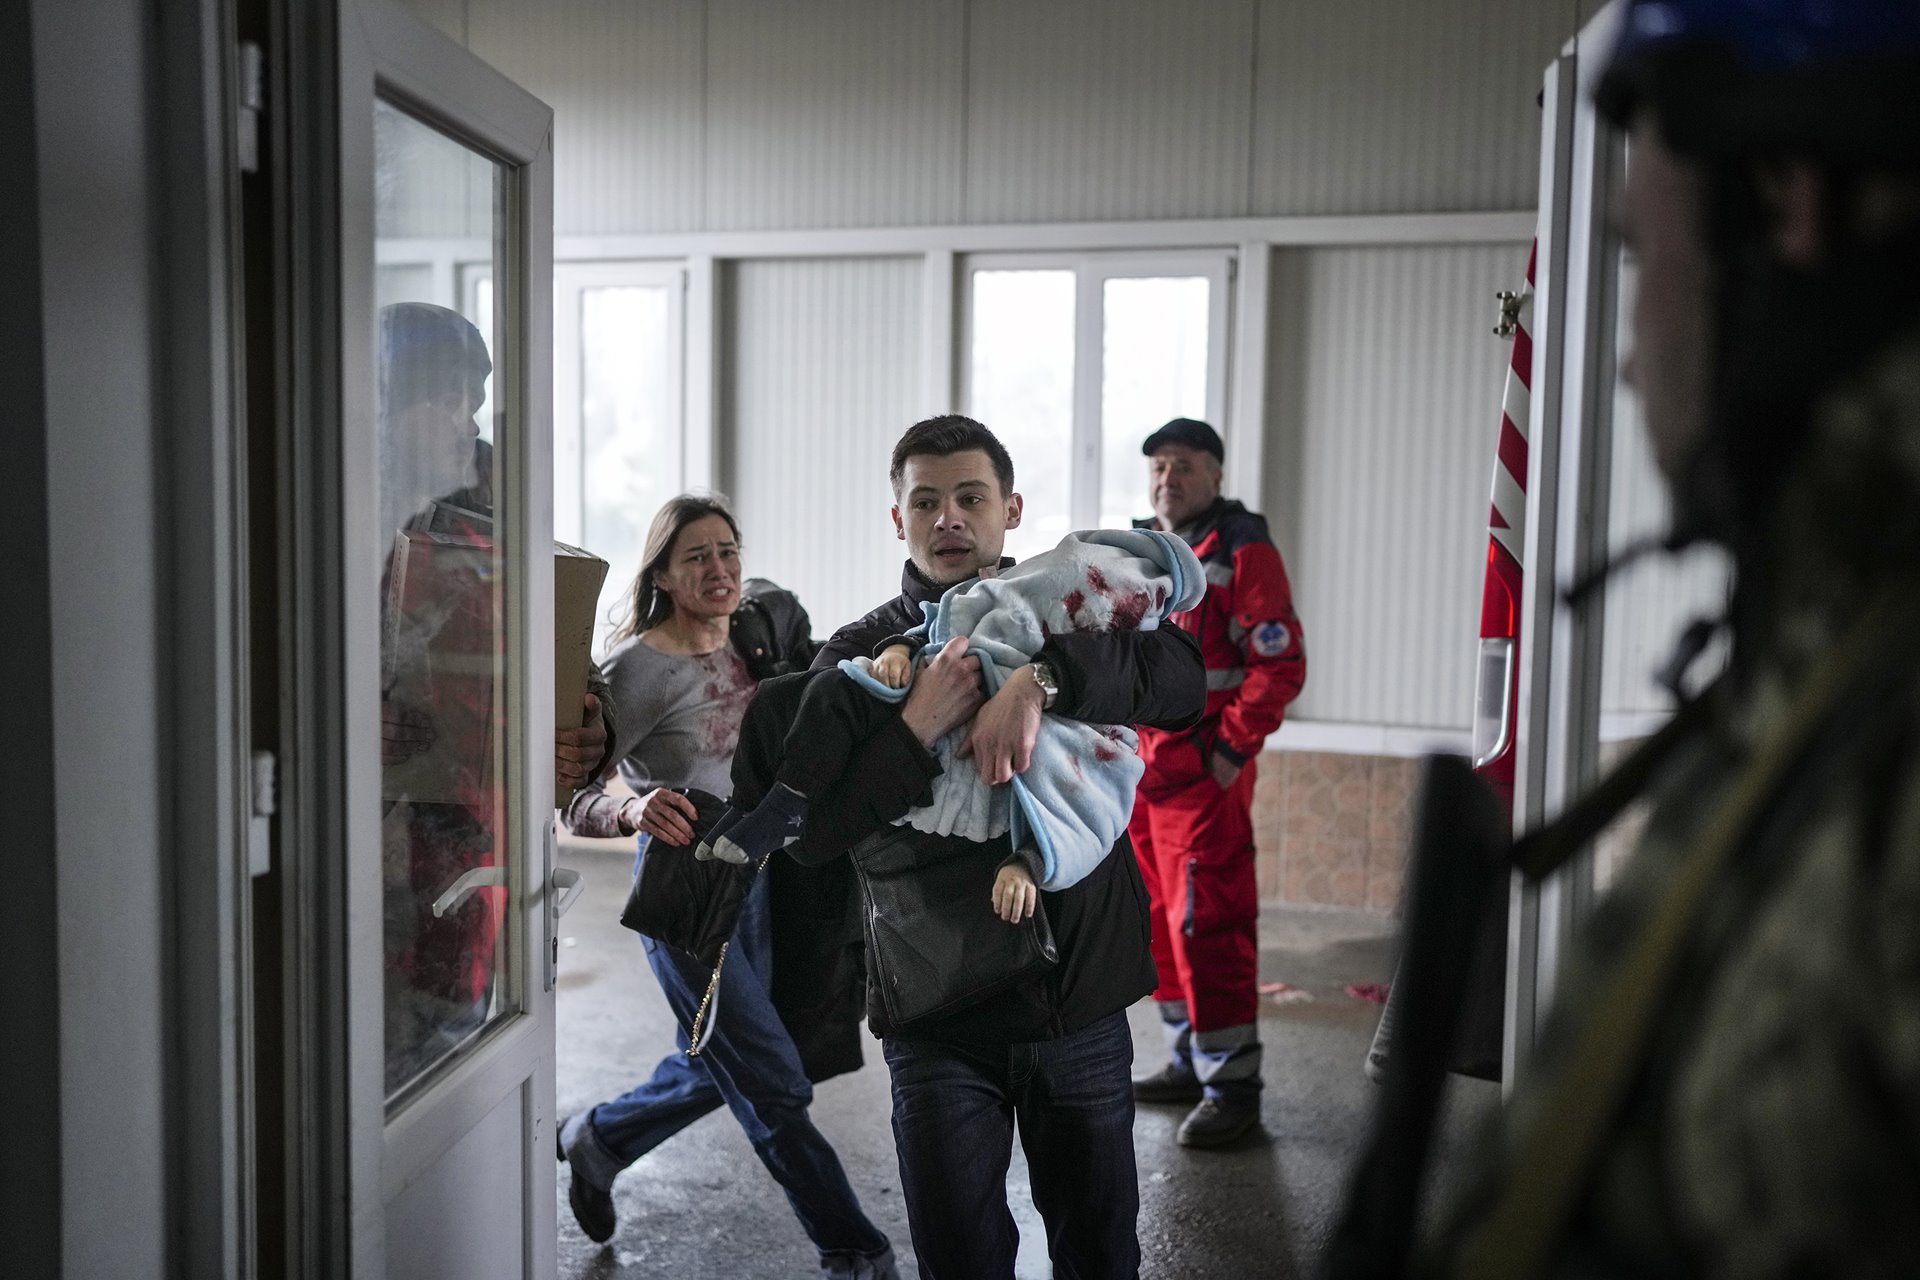 <p>Marina Yatsko and her boyfriend Oleksandr Kulahin bring her 18-month-old son Kirill, fatally wounded during shelling, to a hospital in Mariupol, Ukraine.</p>
